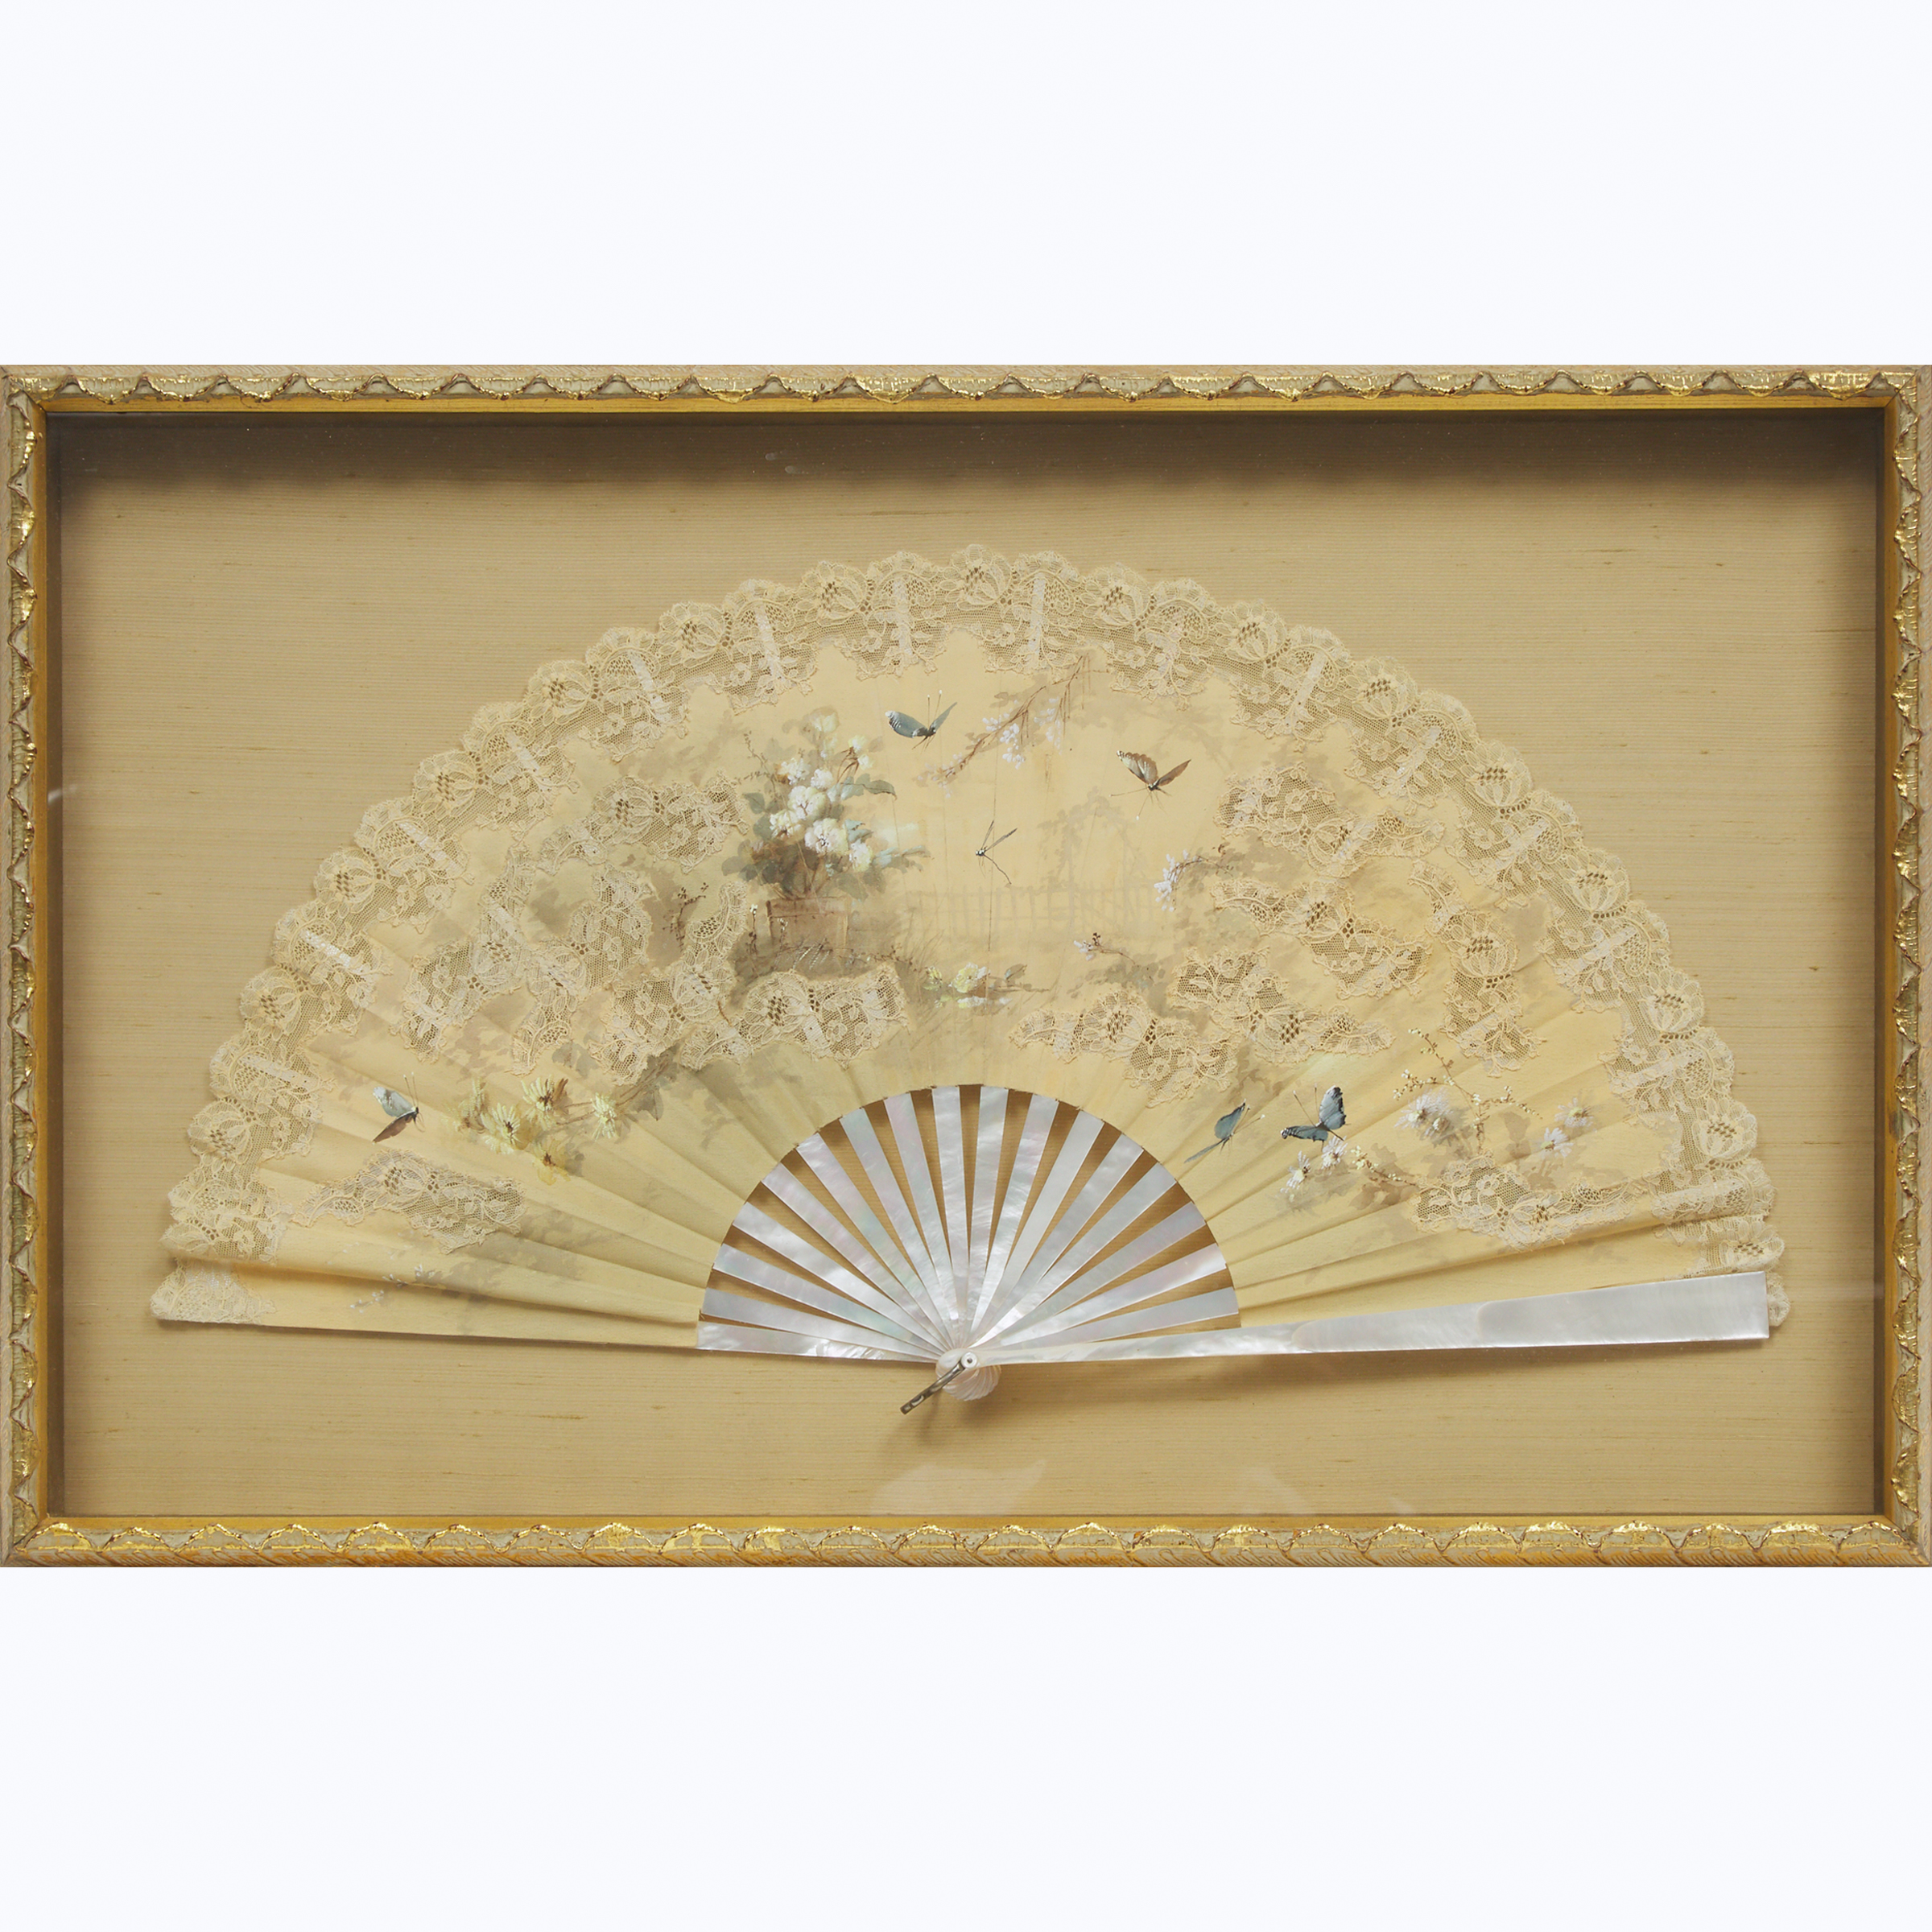 Frame Cased Large French Lace and Painted Silk Fan, early 20th century